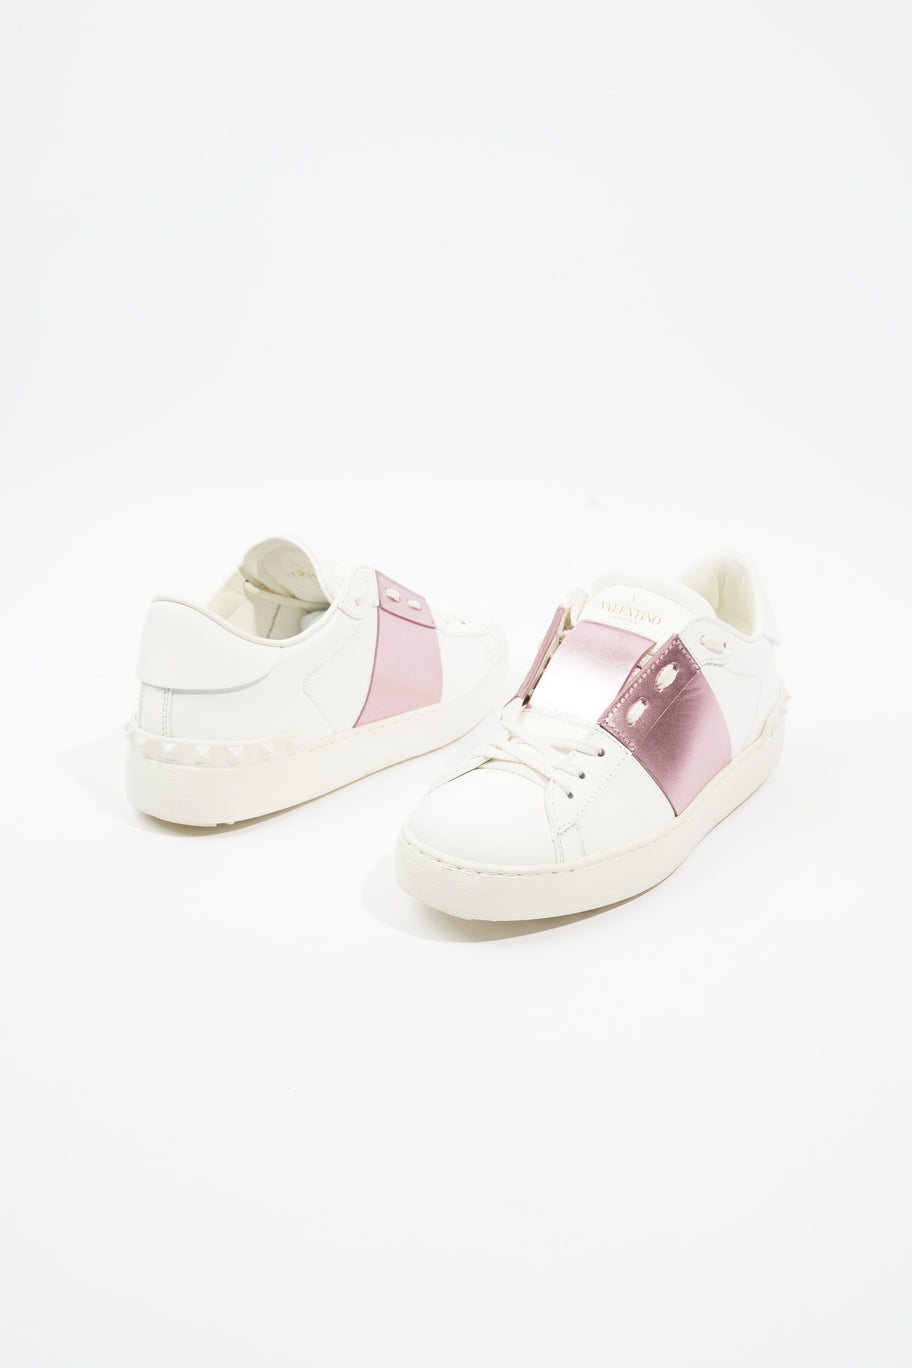 Open Sneakers White / Pink Leather EU 37.5 UK 4.5 Image 9